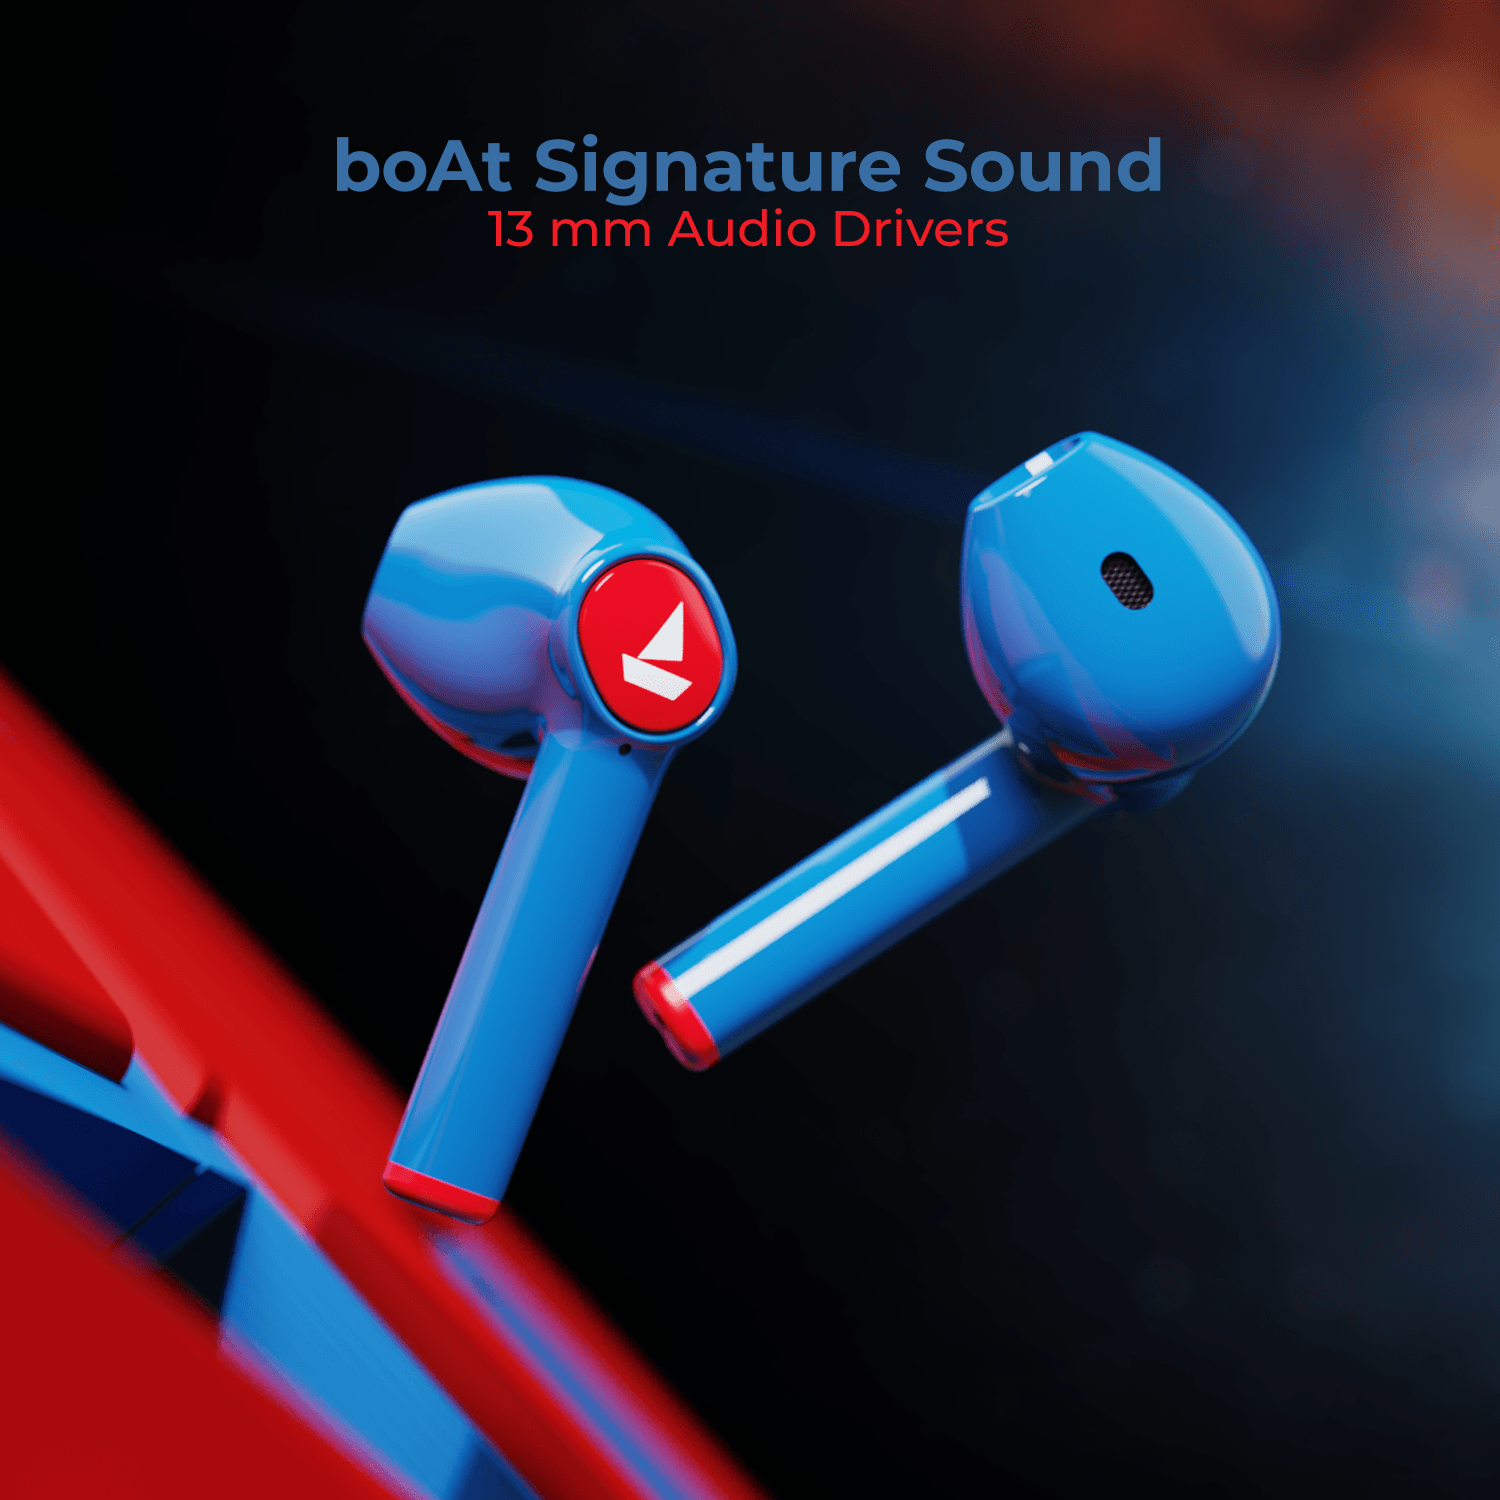 boAt Airdopes 131 Captain America Marvel Edition | Wireless Earbuds with 13mm Audio Drivers, IWP Technology, Type C Charging, Voice Assistant On Single Press